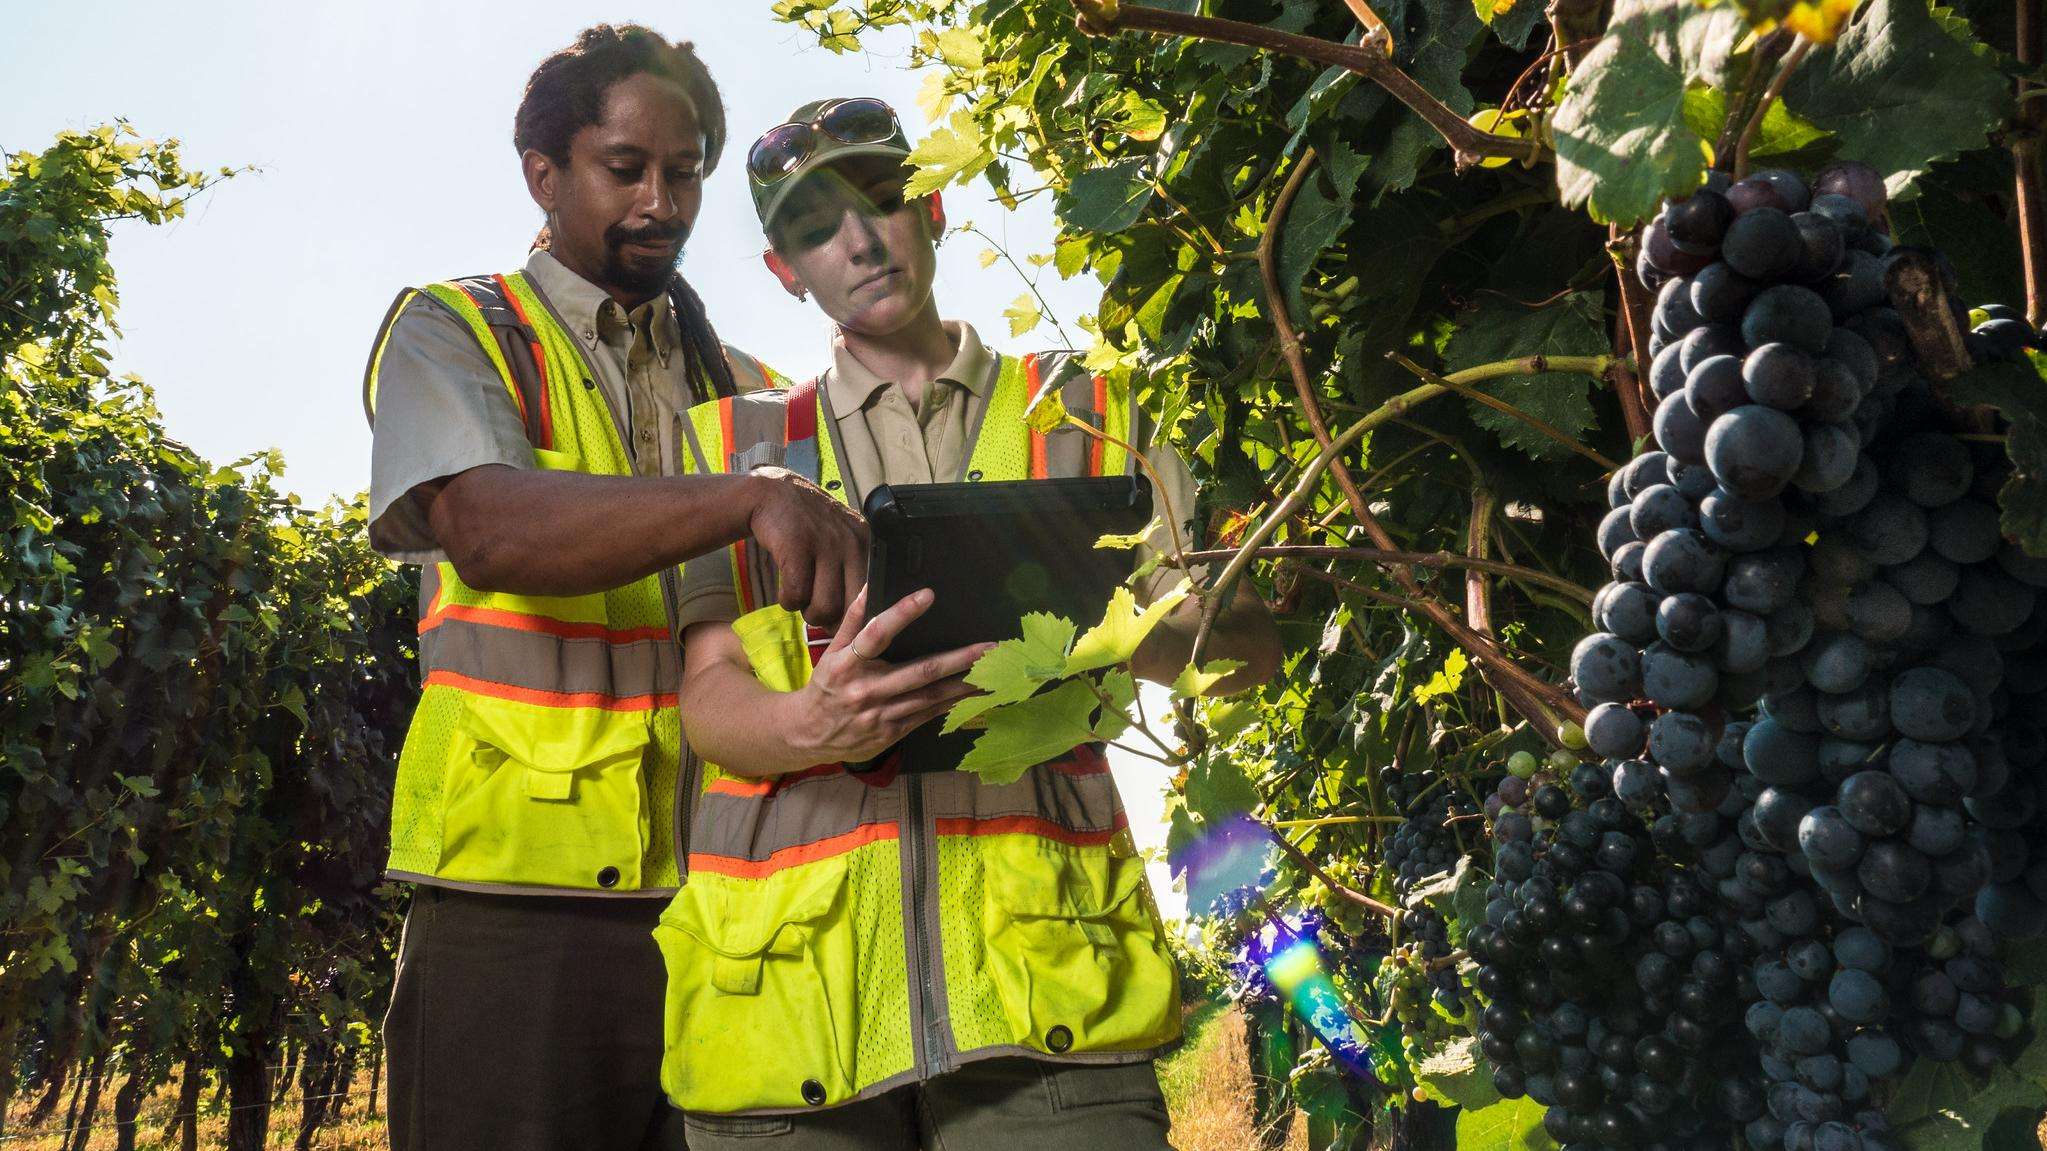 One man and one woman wearing yellow USDA Plant Pest Survey vests looking for pests on grapevines.